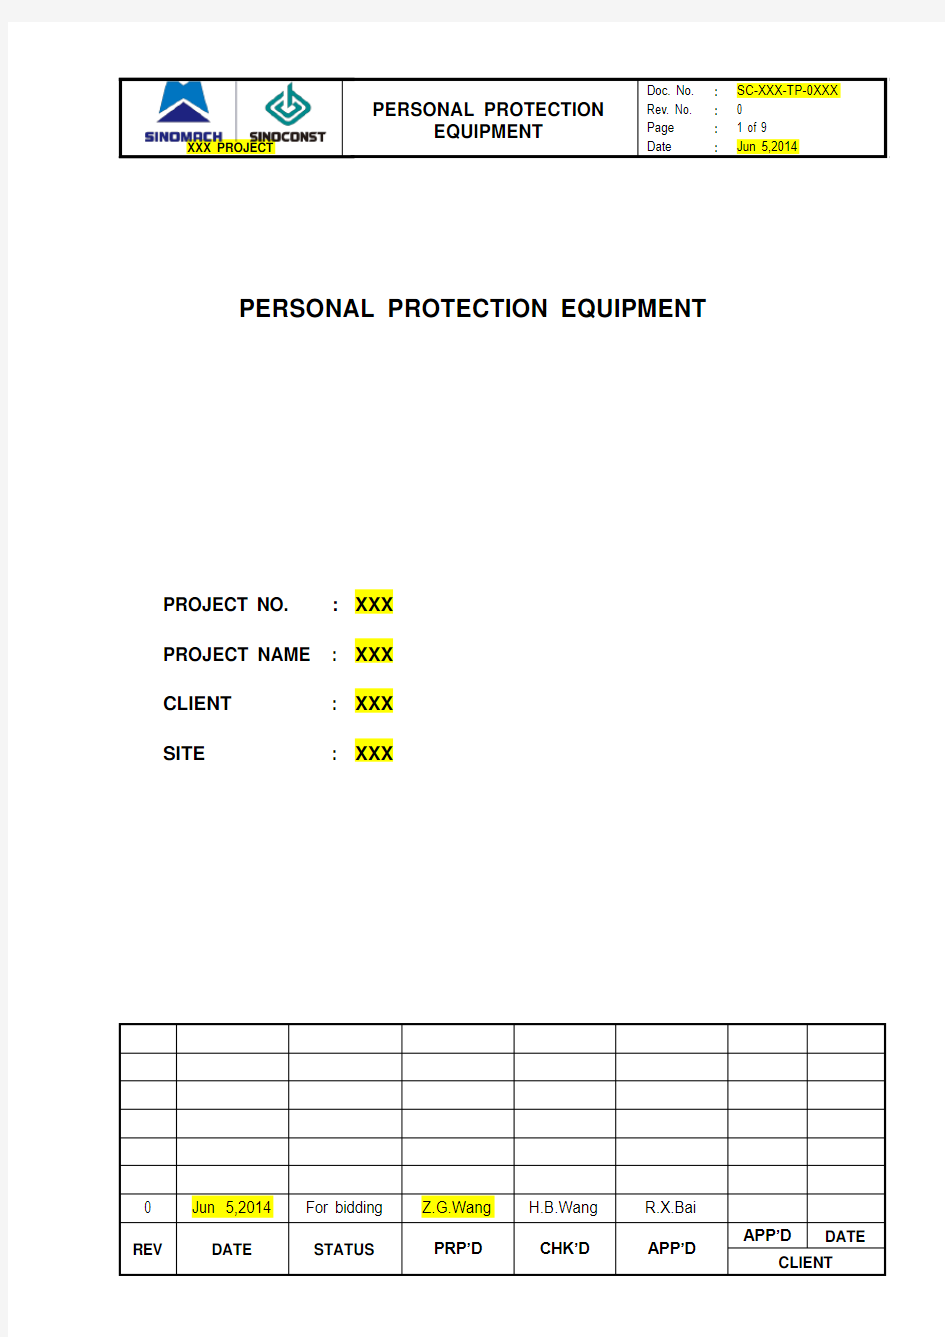 SC-XXX-TP-008_Personal Protection Equipment